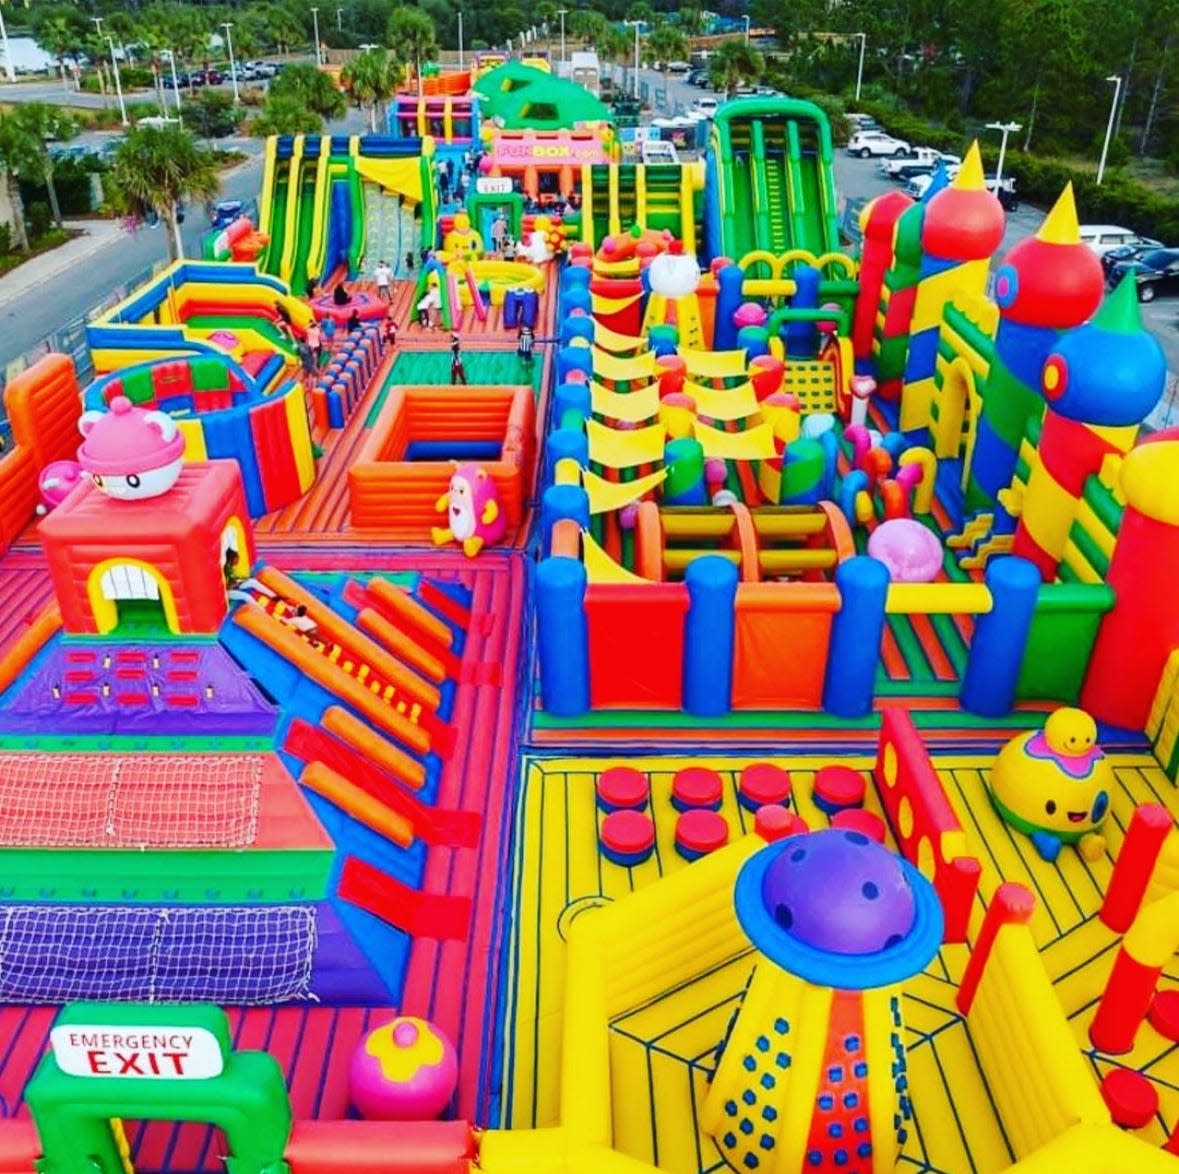 Funbox offers 25,000 square feet of connected jumping zones that feature 10 different play areas for kids of all ages.